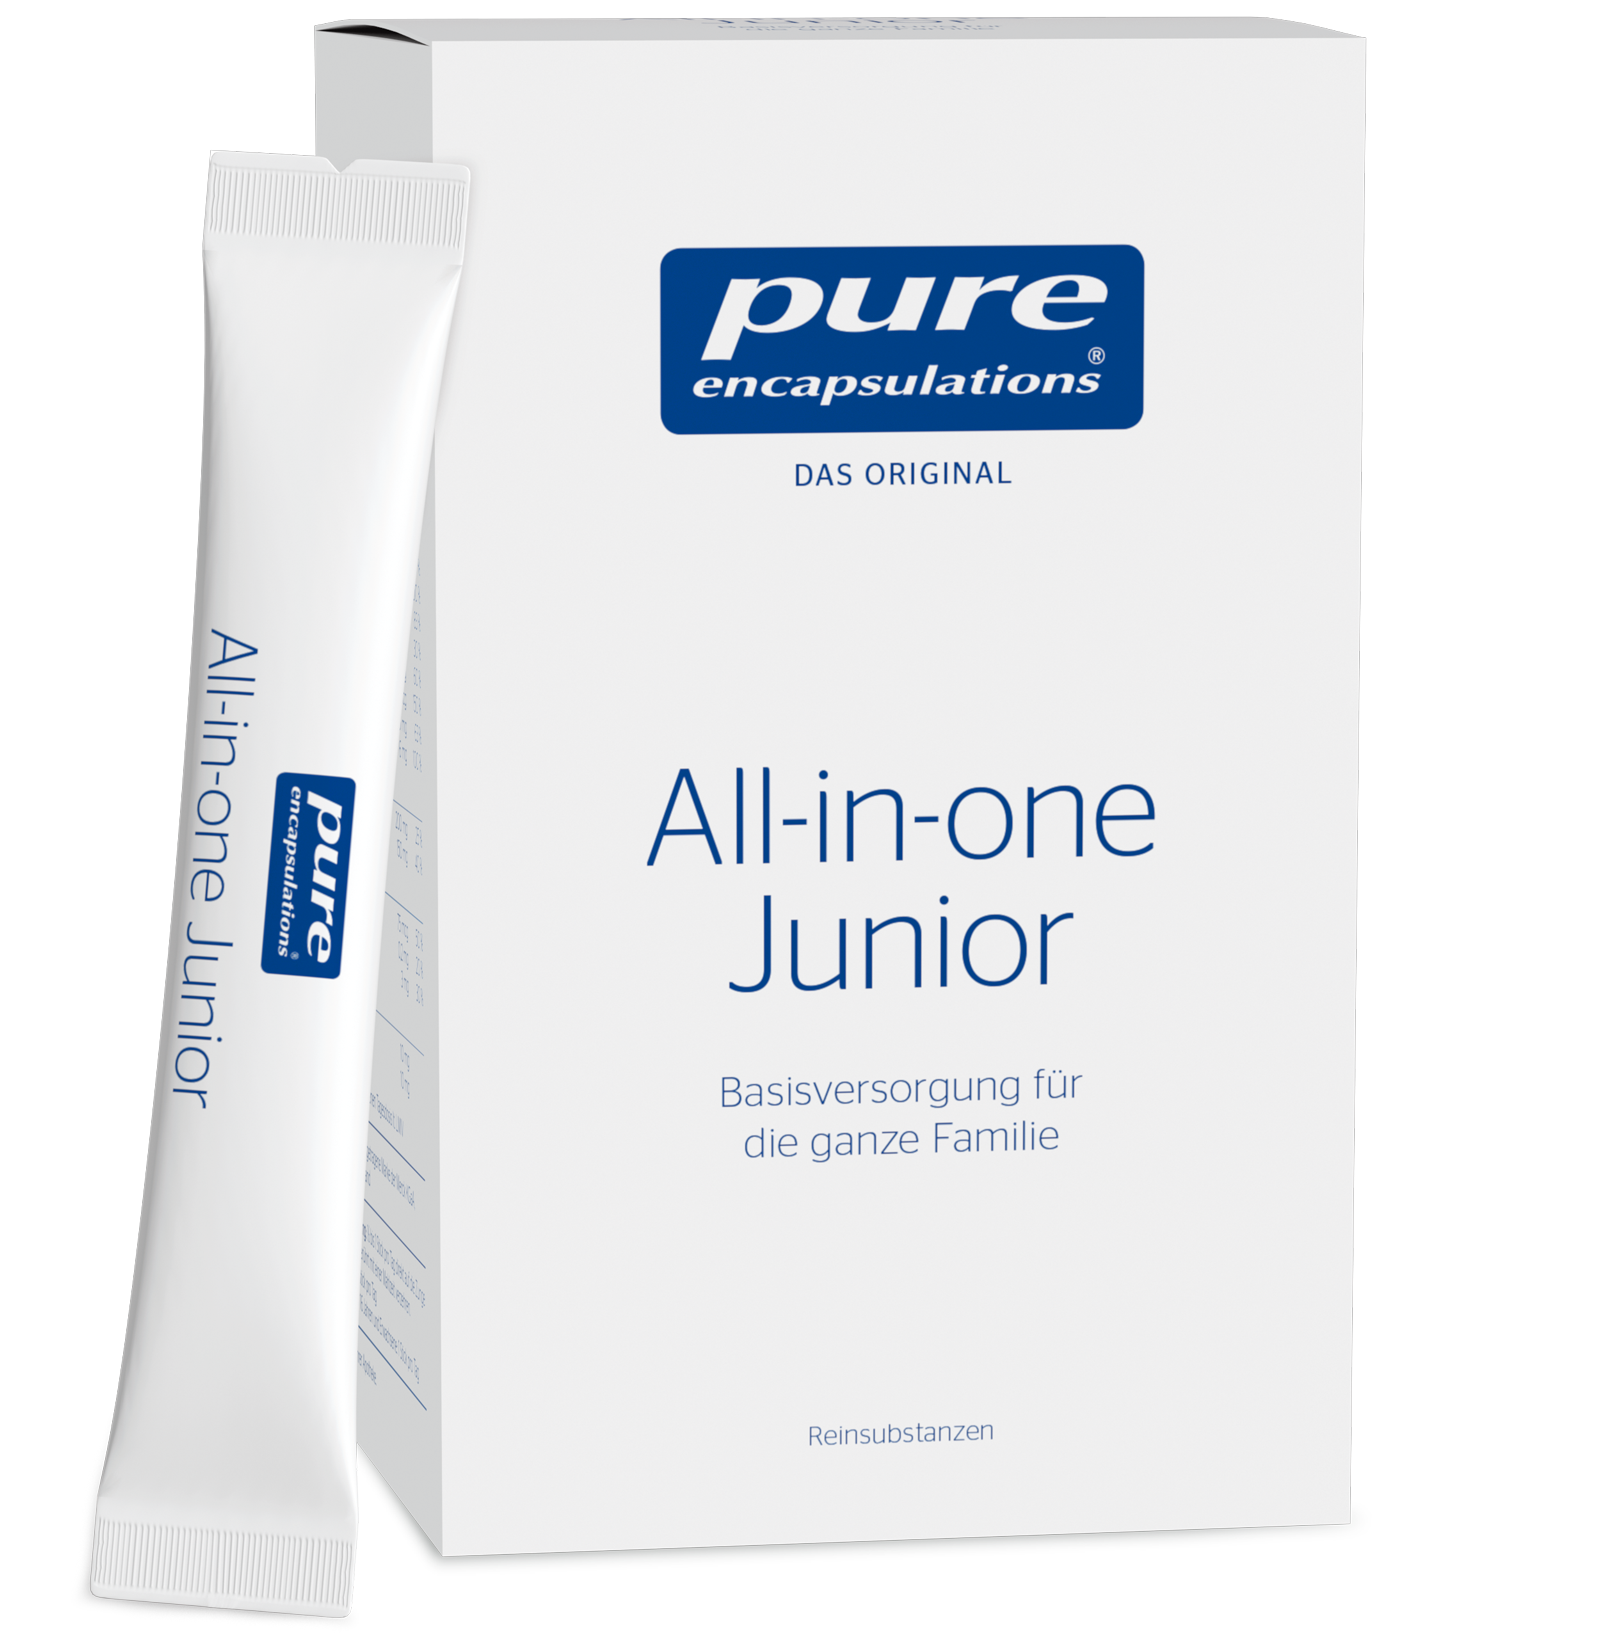 All-in-one Junior